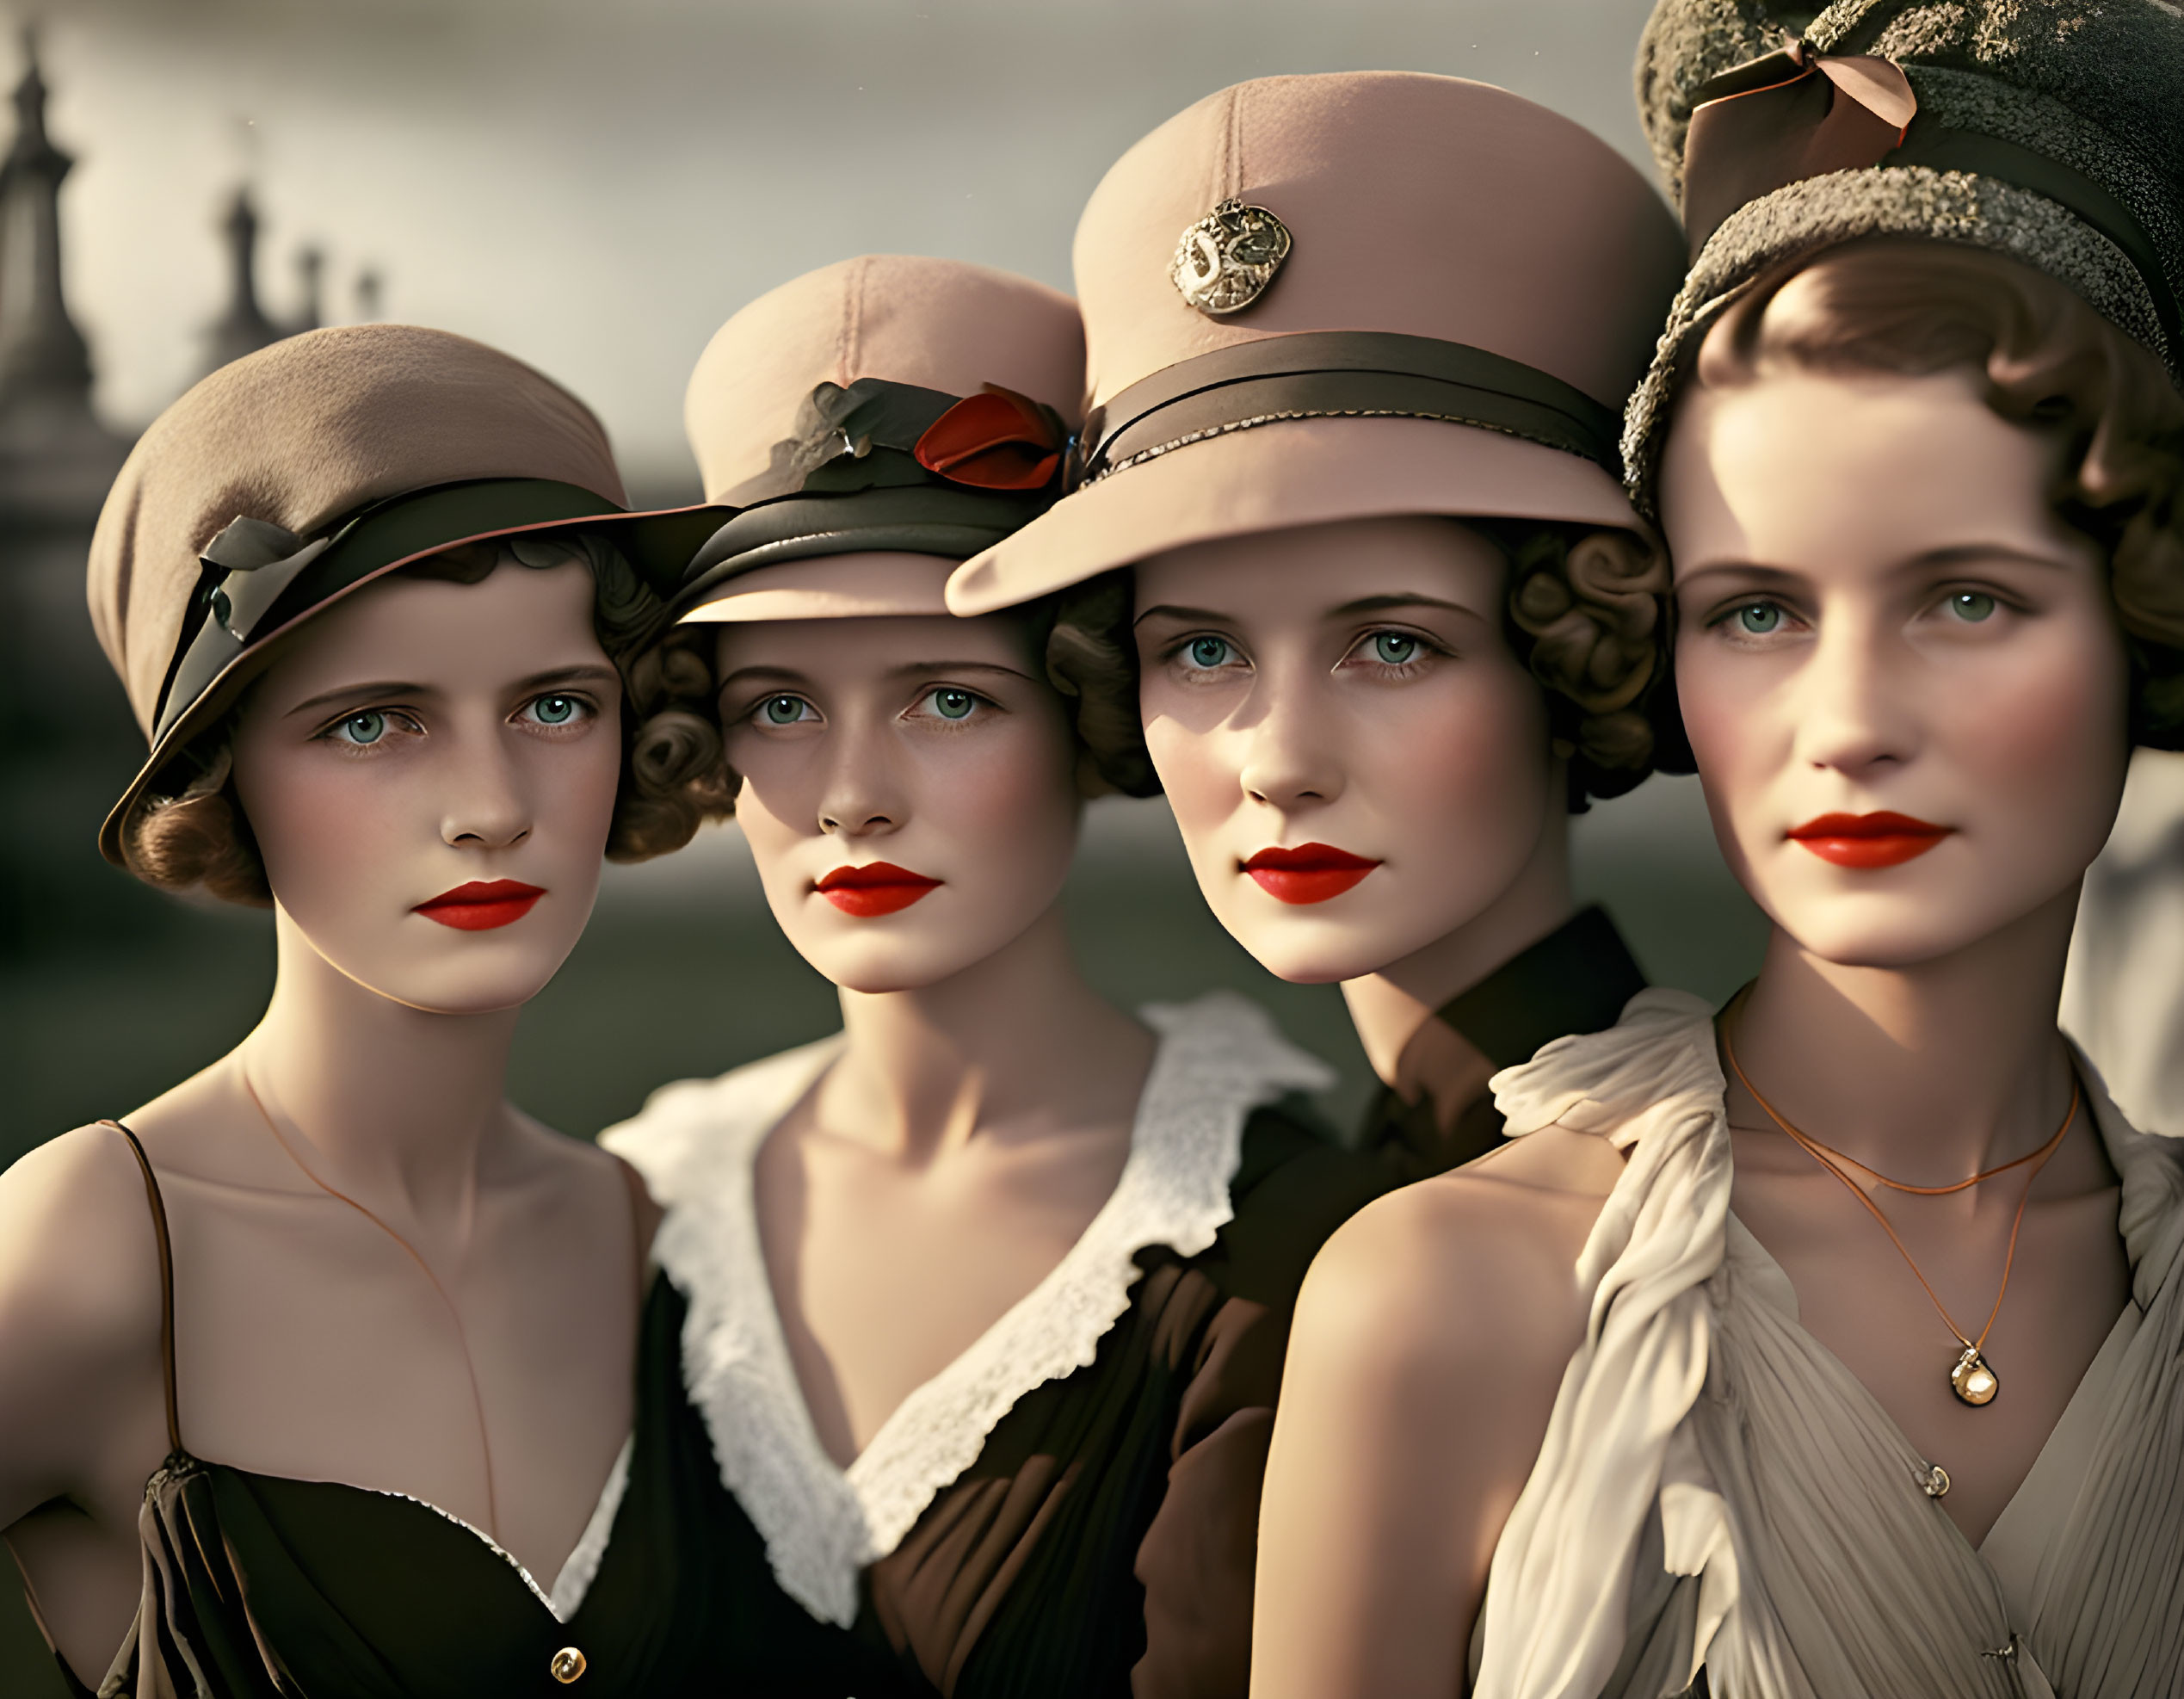 Vintage fashion: Four women in classic hats with styled hair, exuding elegance.